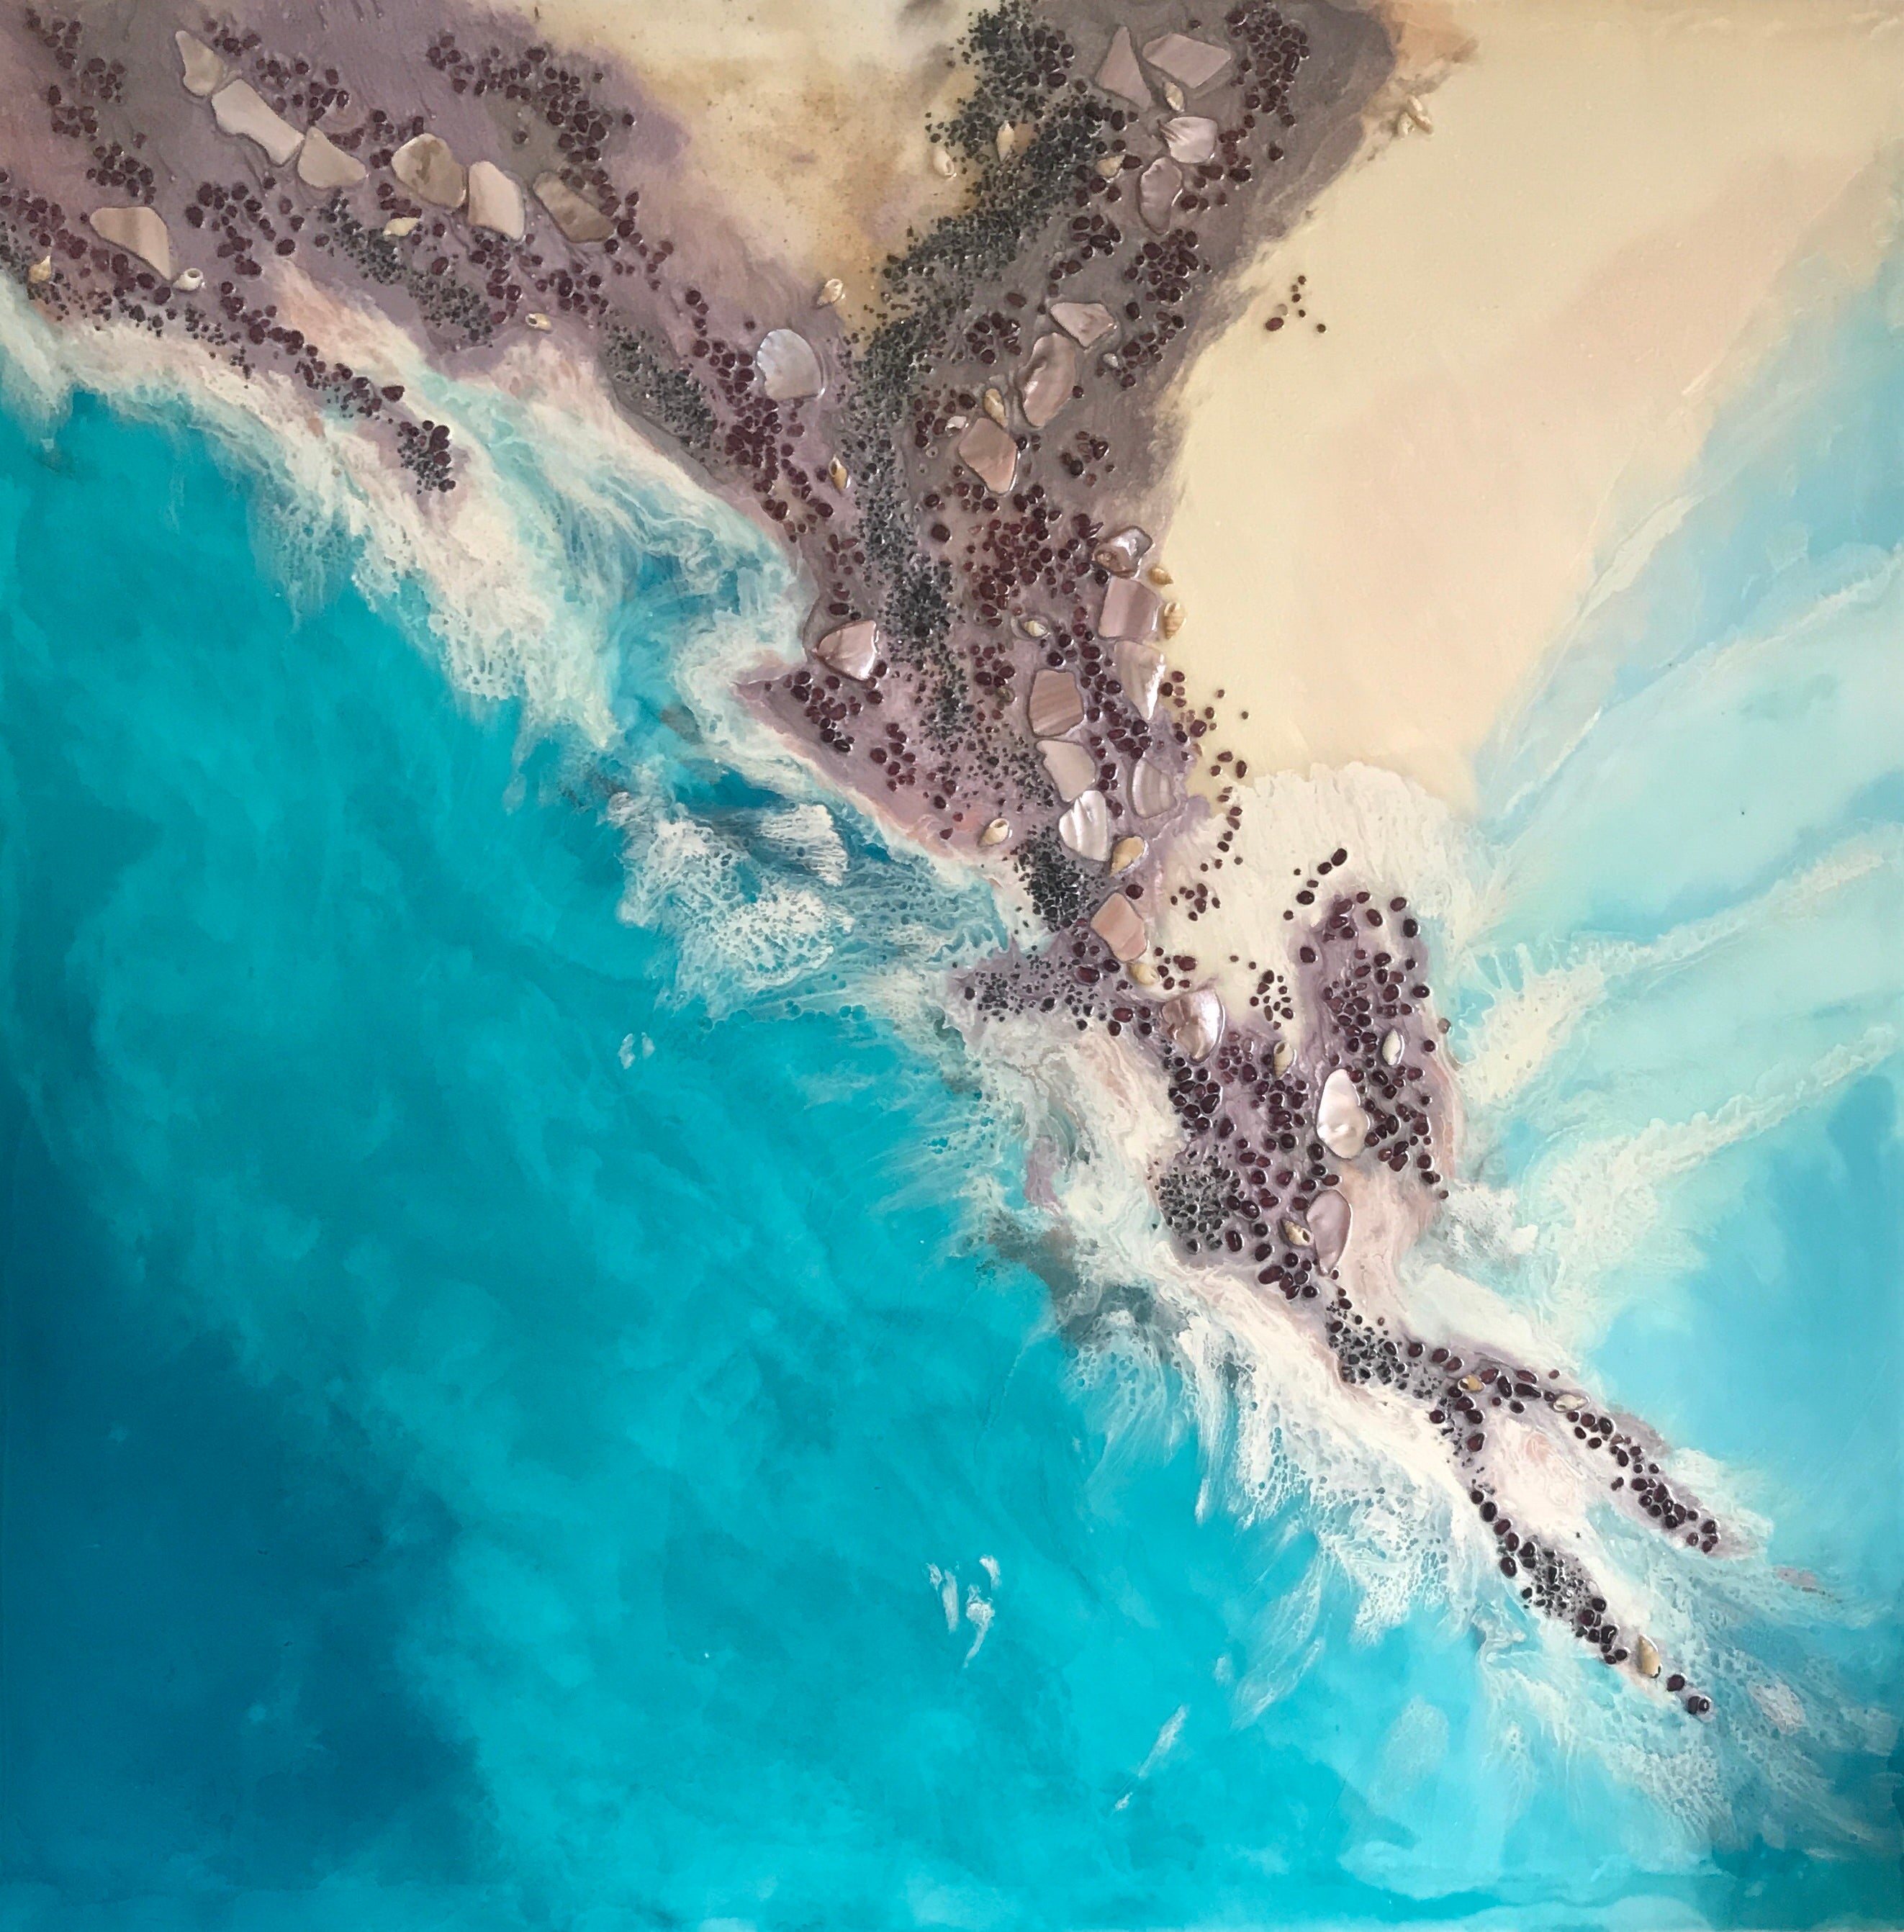 Teal Blue Ocean Wave. Byron Bay Magic. Original Artwork. Antuanelle 2 Magic with Mussels and Garnet. Abstract Seascape 90x90cm